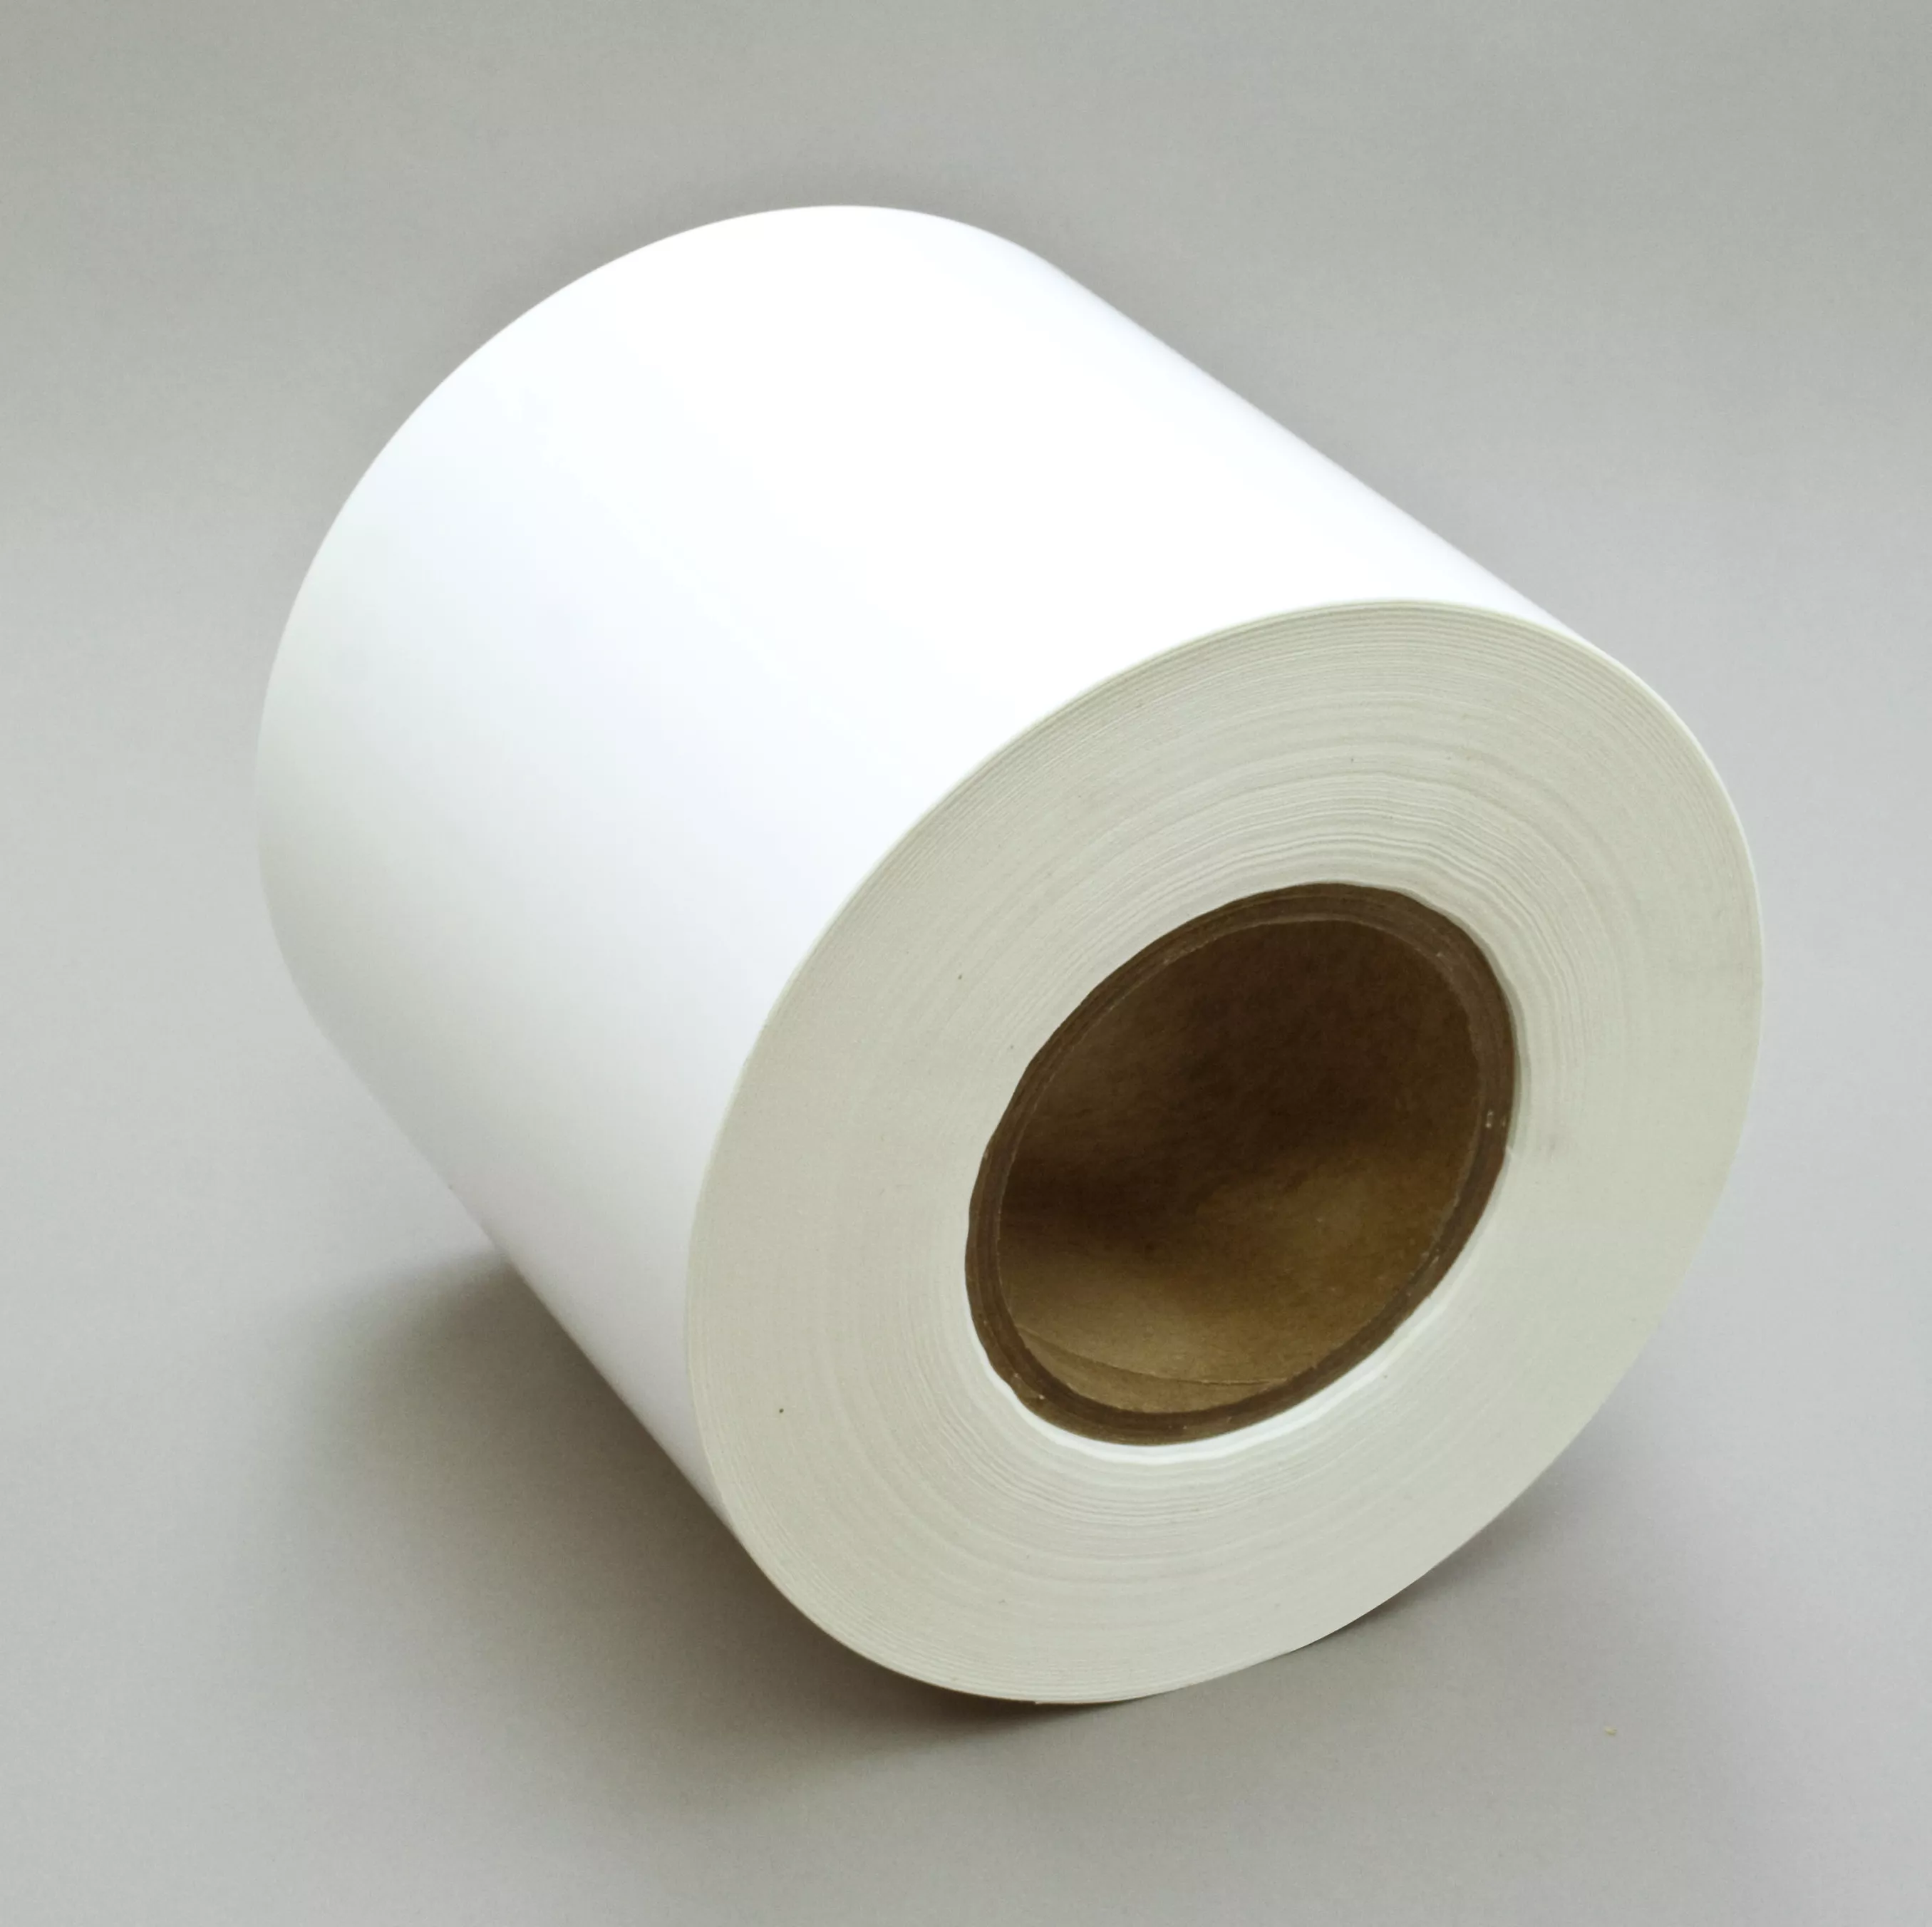 3M™ Thermal Transfer Label Material 7815, White Polyester Matte, 4.5 in
x 1668 ft, 1 Roll/Case